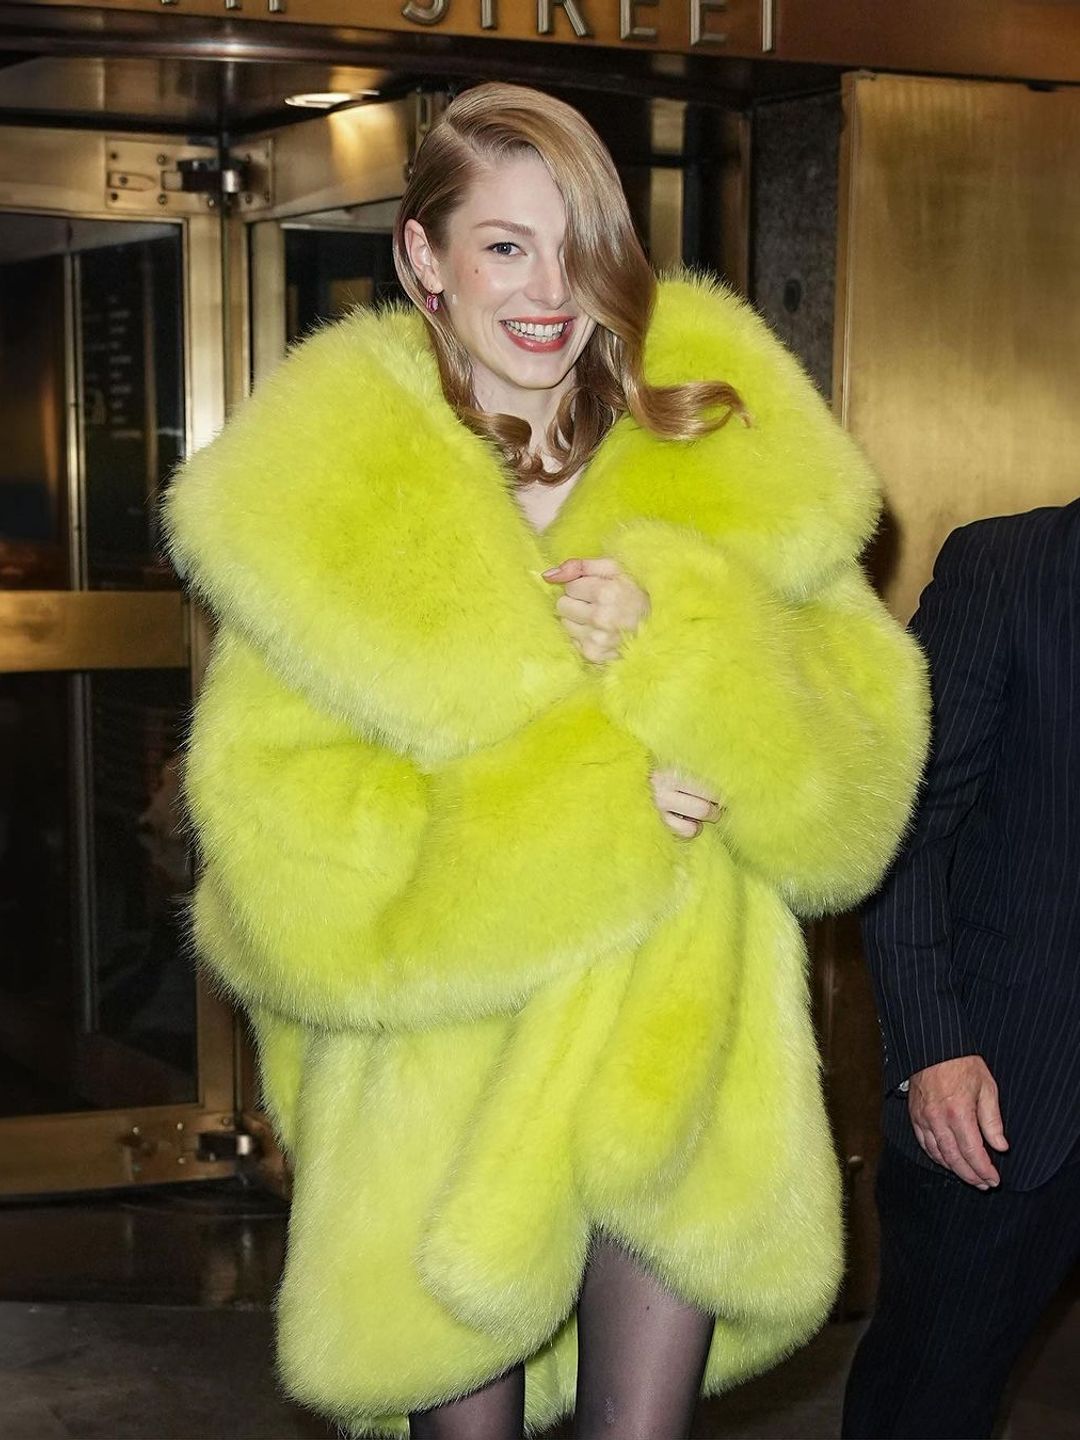 It's giving Big Bird, but chic